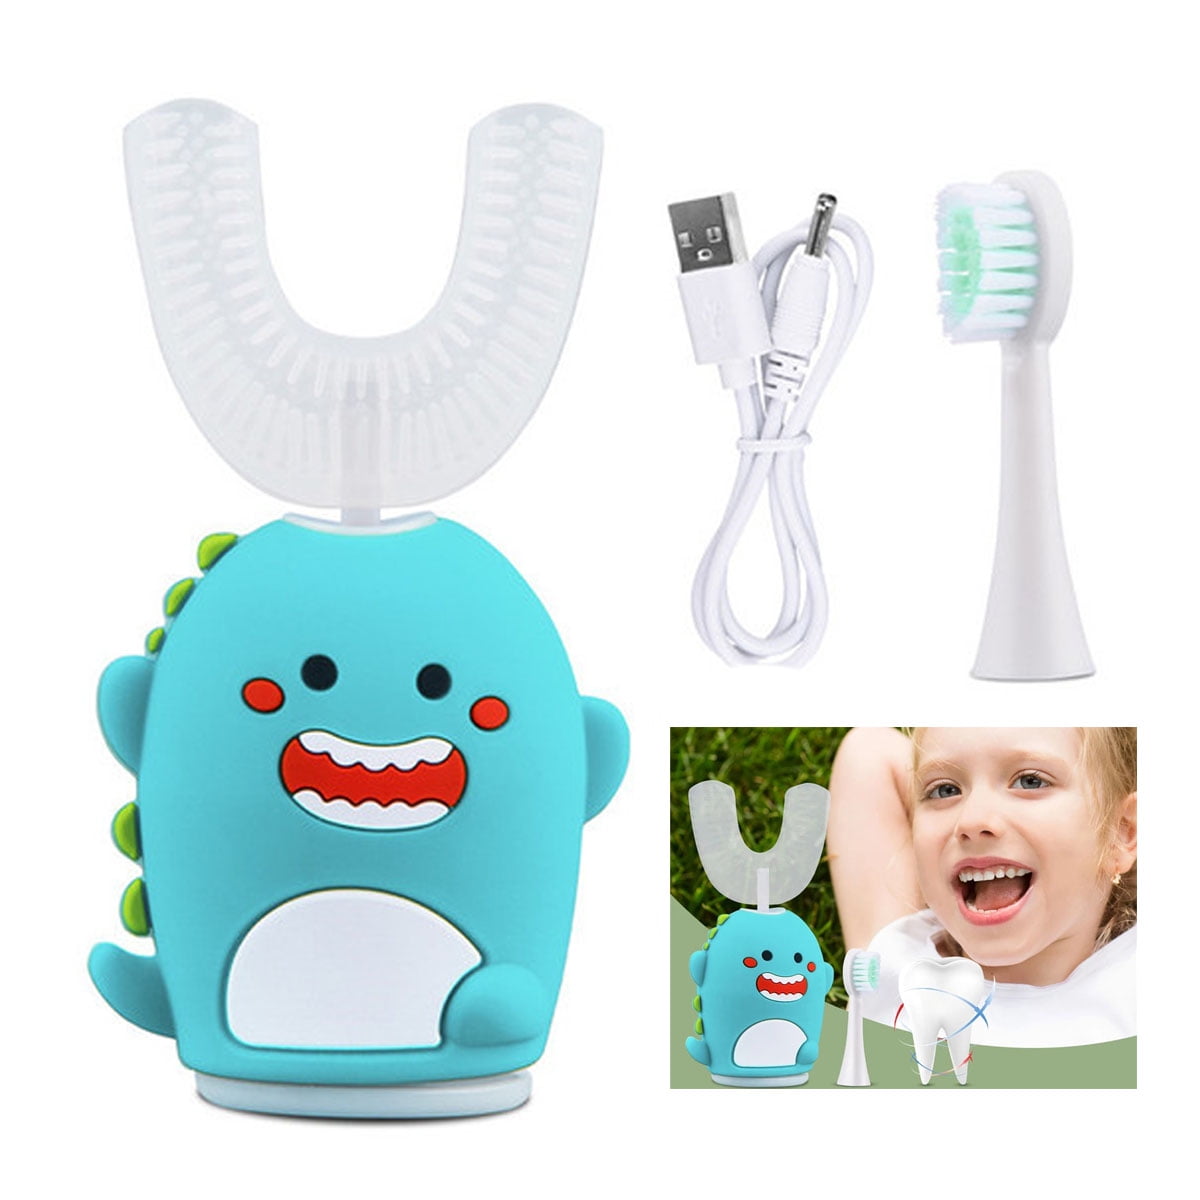 Kids Children's Electric Toothbrush 360°Automatic Rechargeable Sonic Teeth Brush 